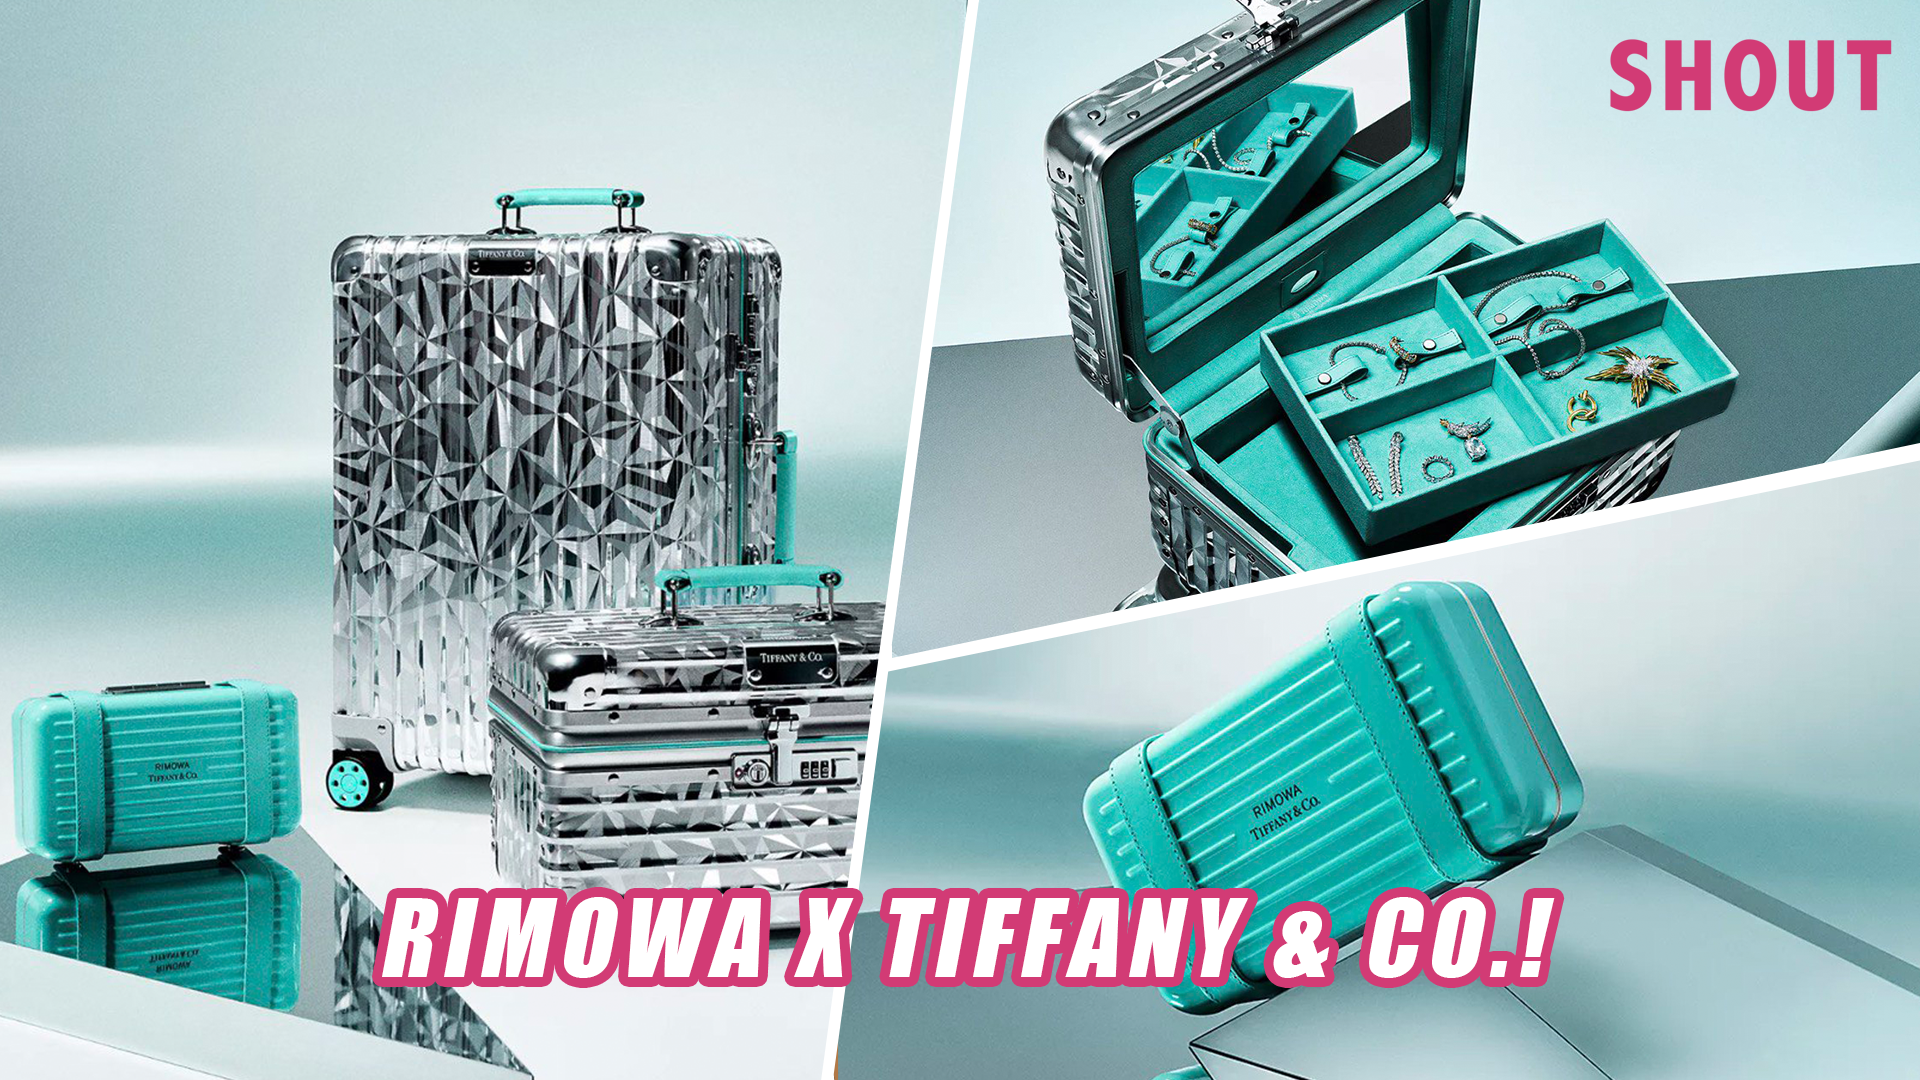 Travel in Style with Tiffany and Co. and RIMOWA's Colloboration